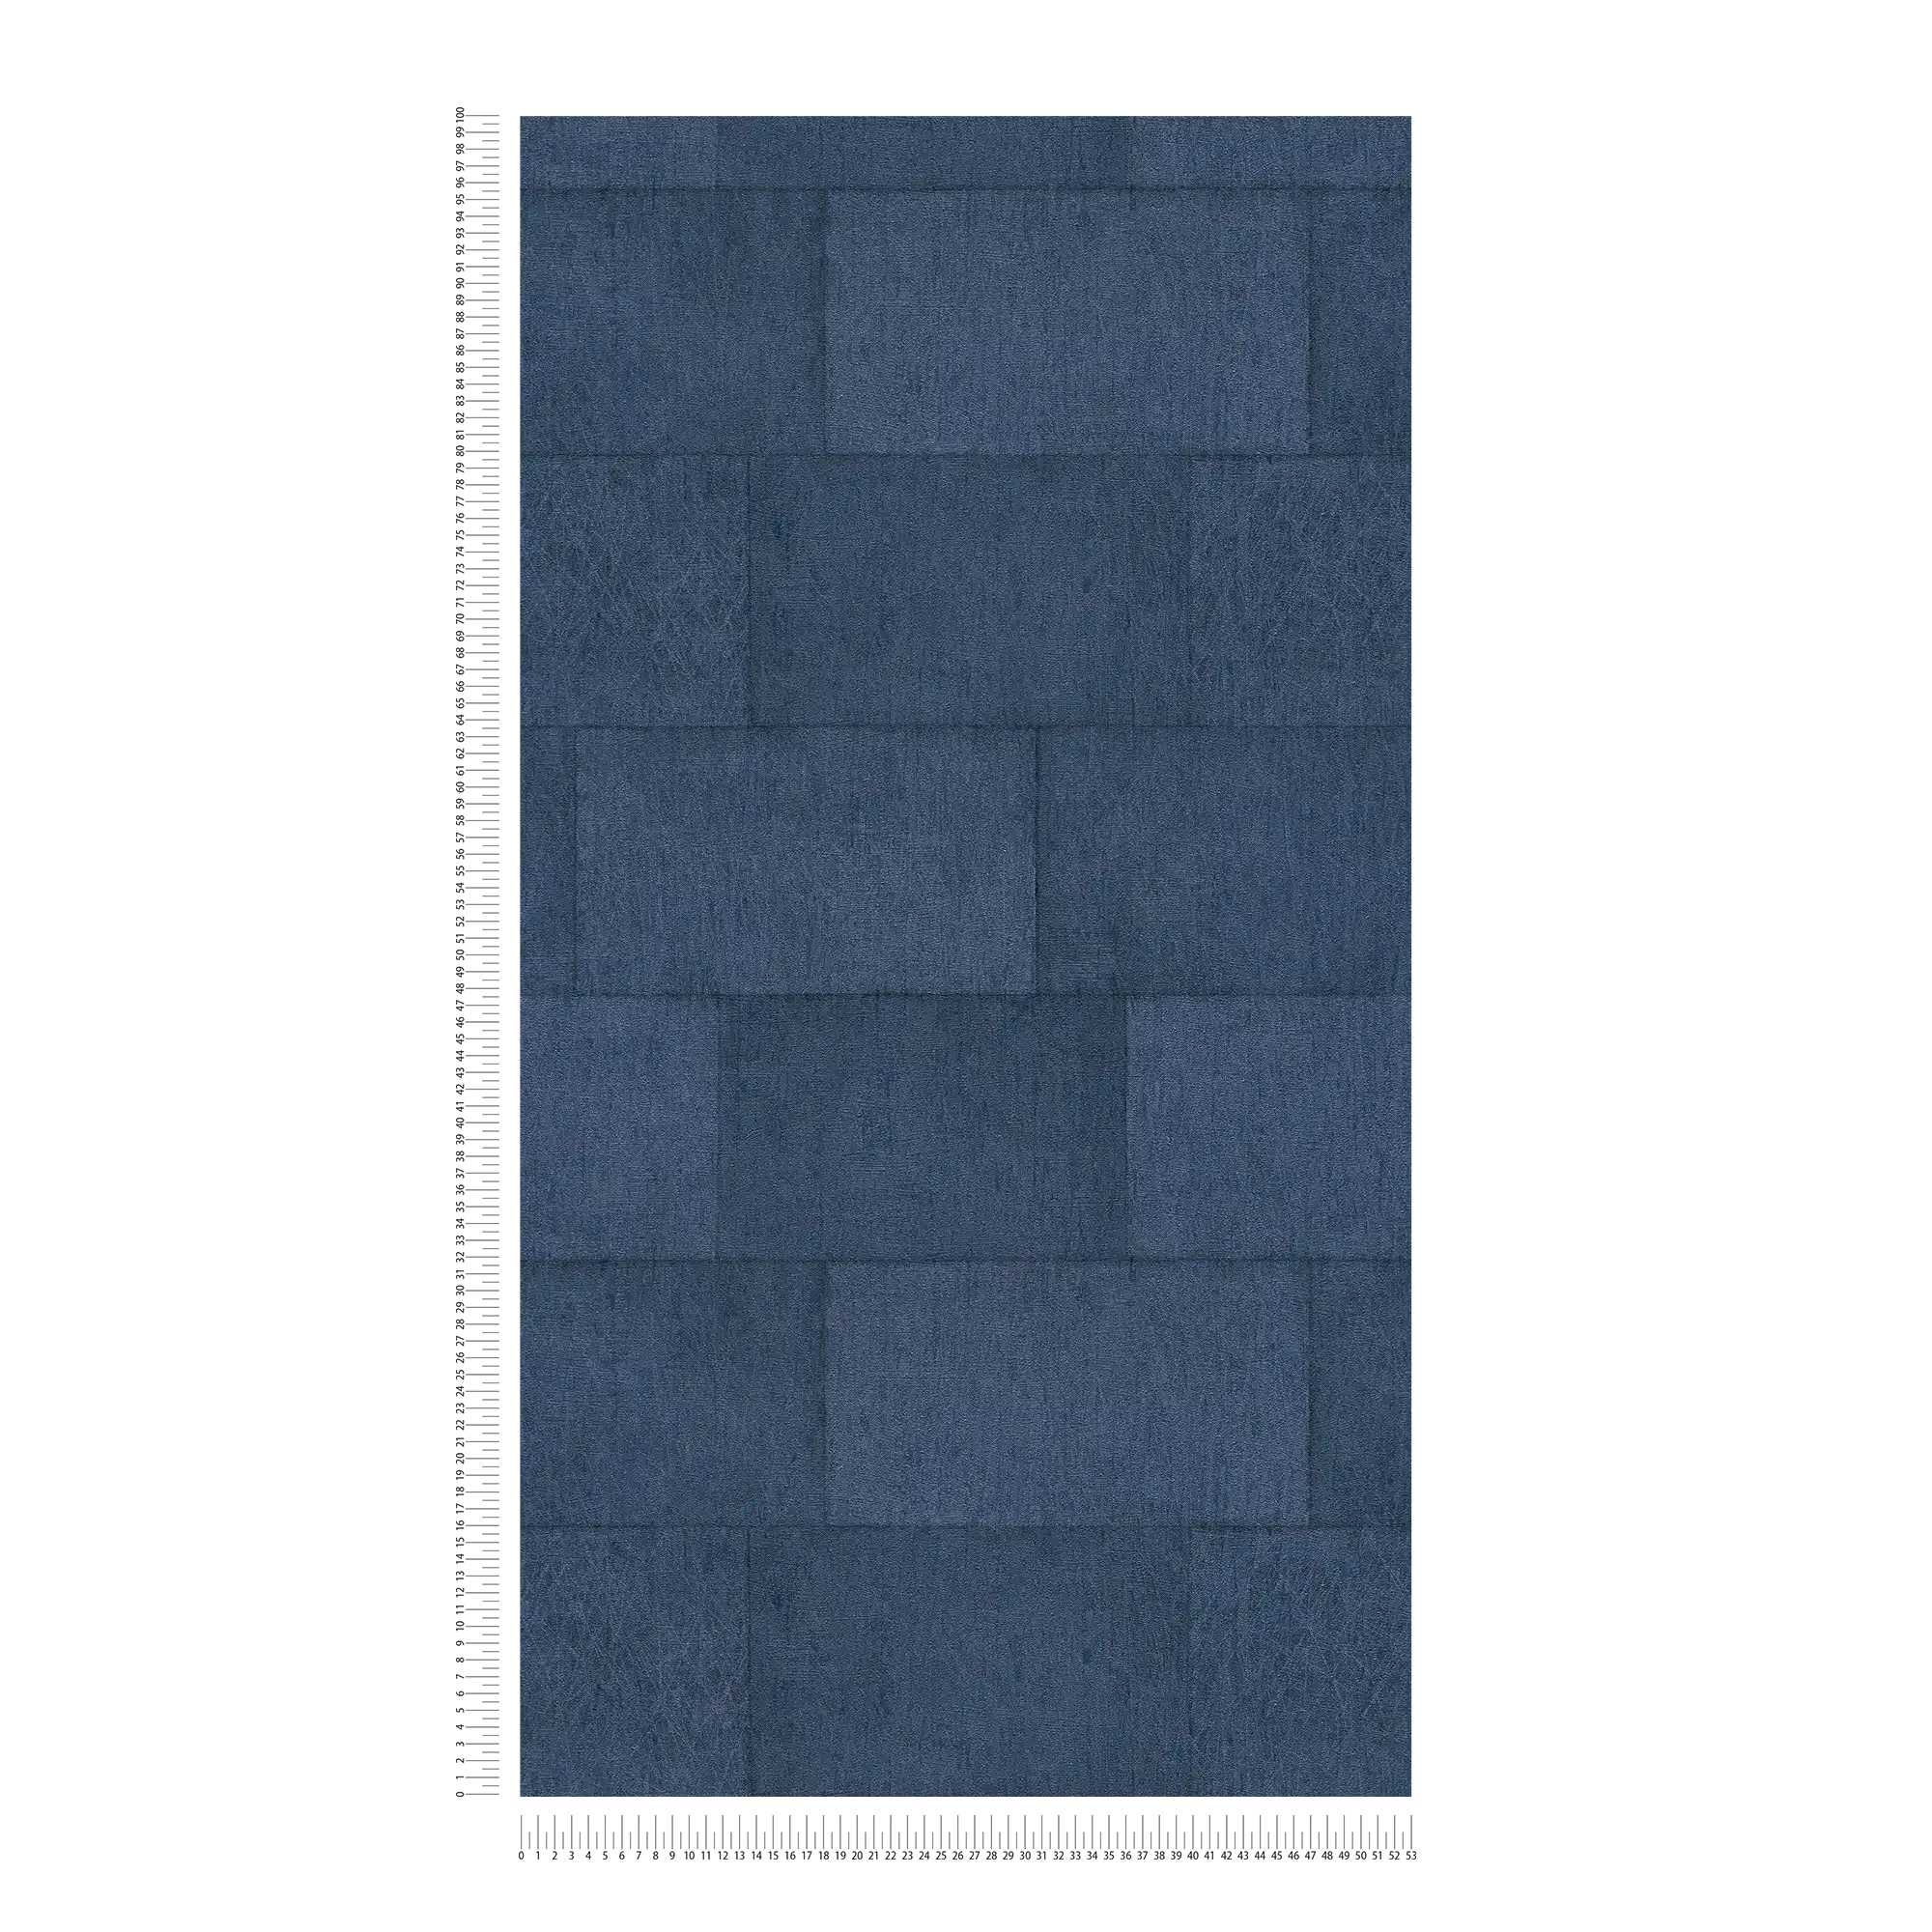             Stone wallpaper dark blue with glossy effect - blue
        